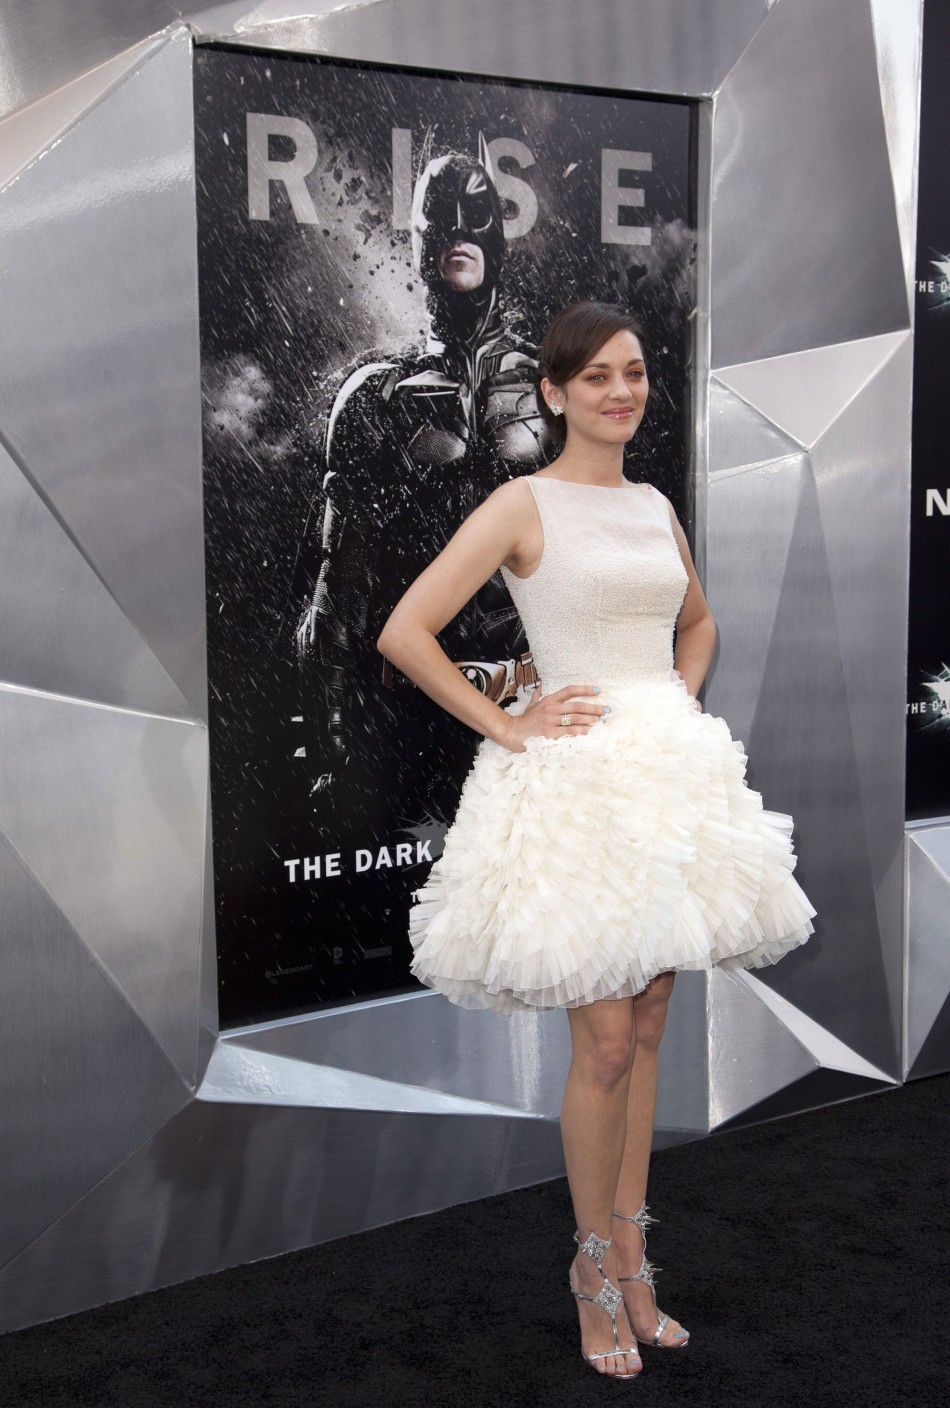 Cast member Marion Cotillard attends the world premiere of quotThe Dark Knight Risesquot in New York